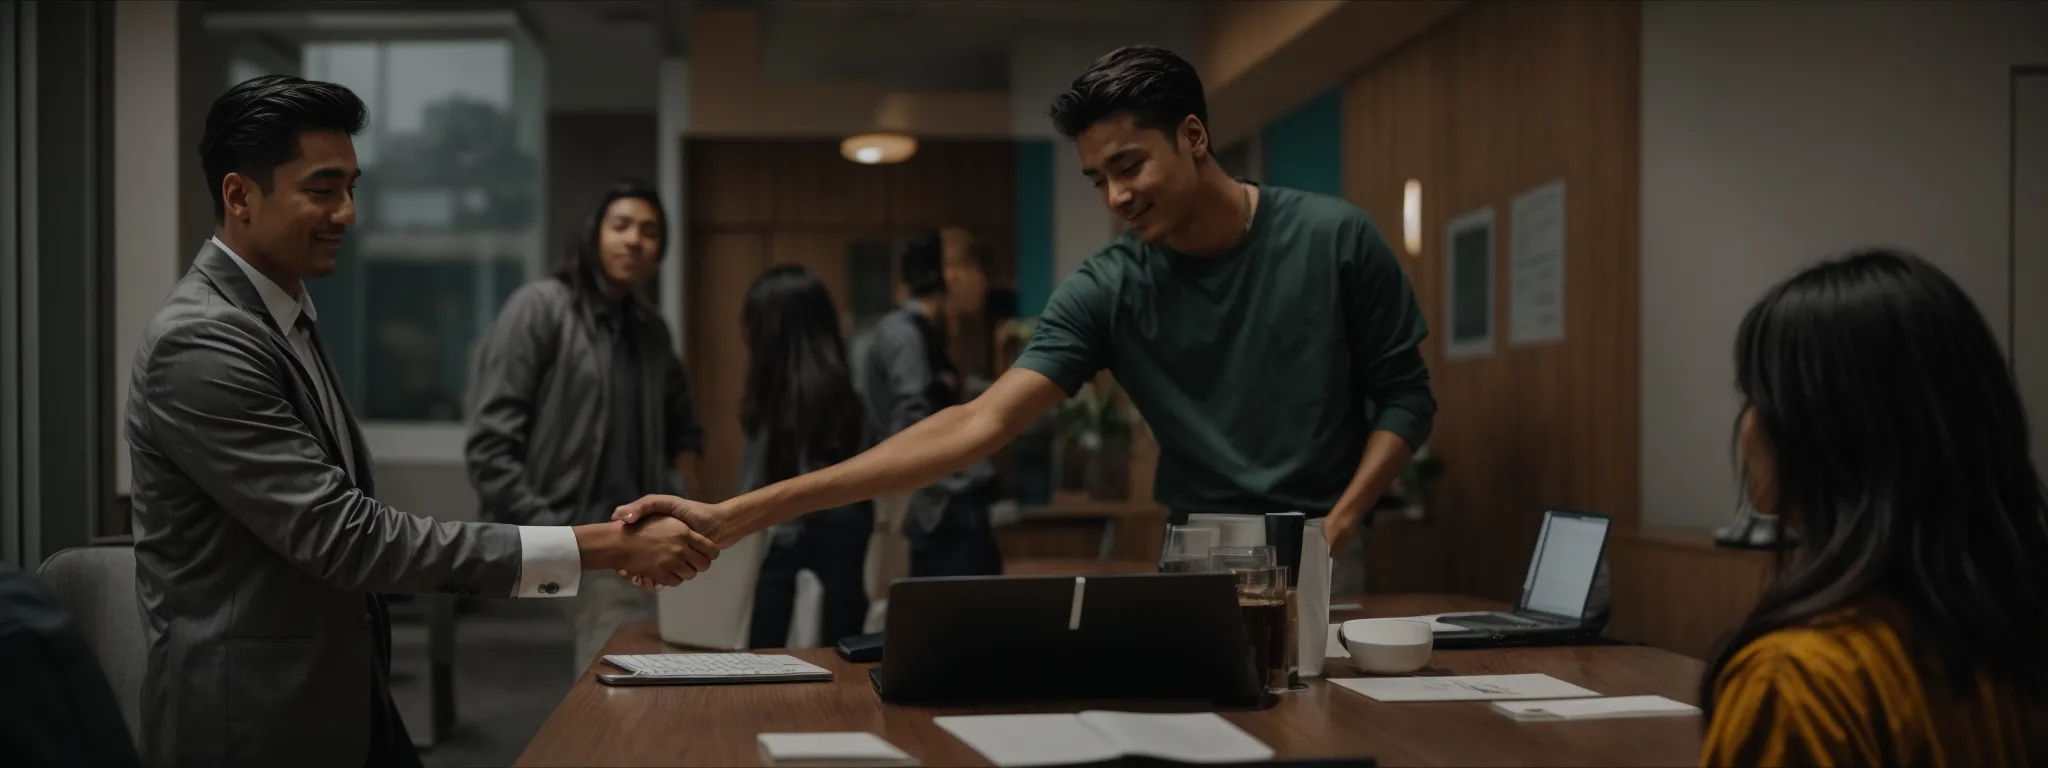 two professionals shaking hands across a conference table with a laptop open between them.